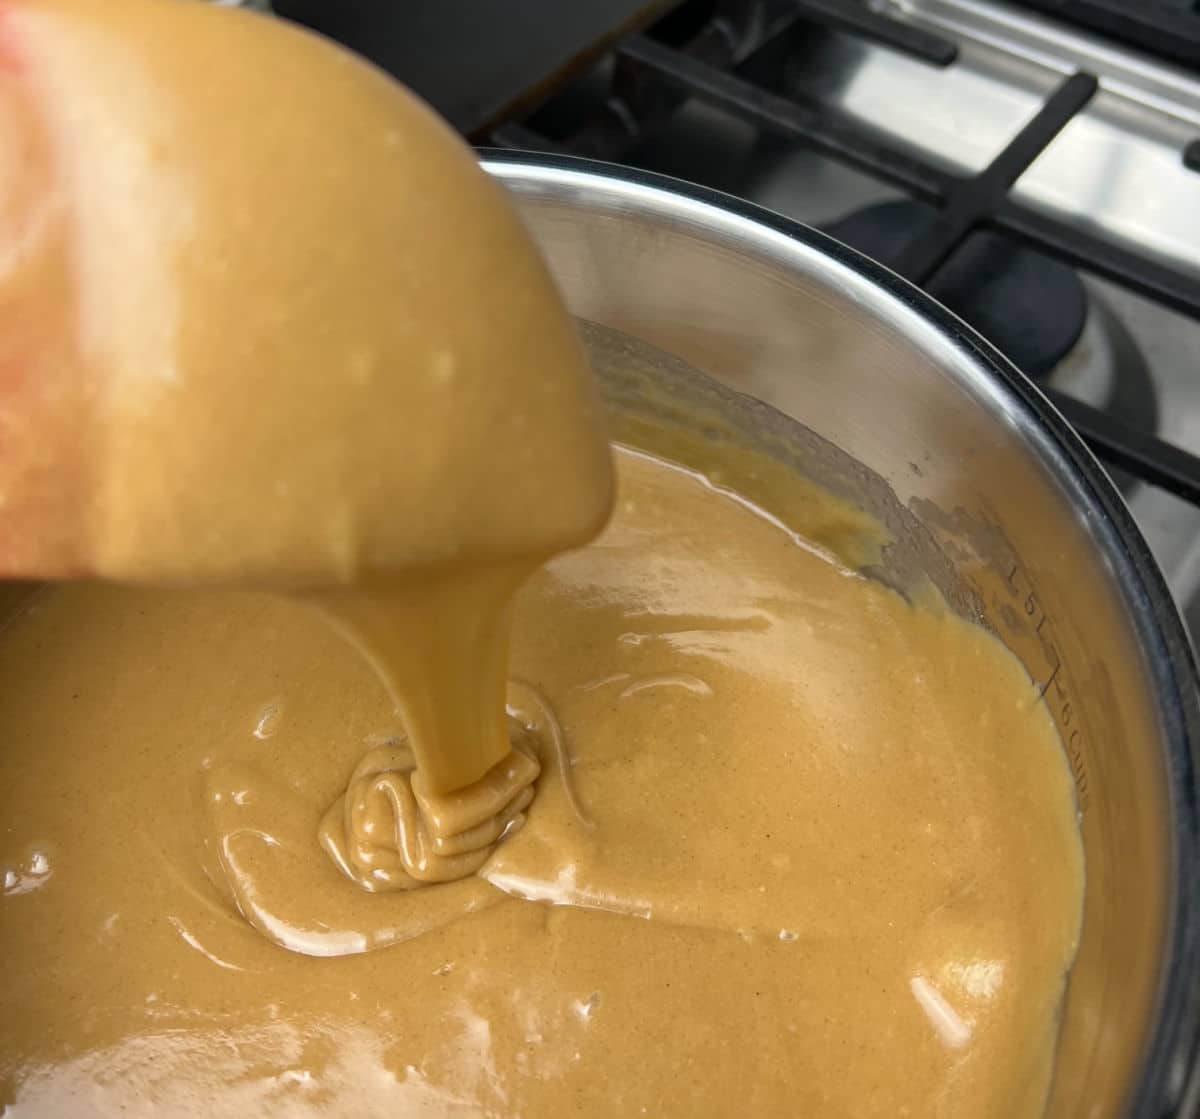 peanut butter and sugar mixture running off a spoon